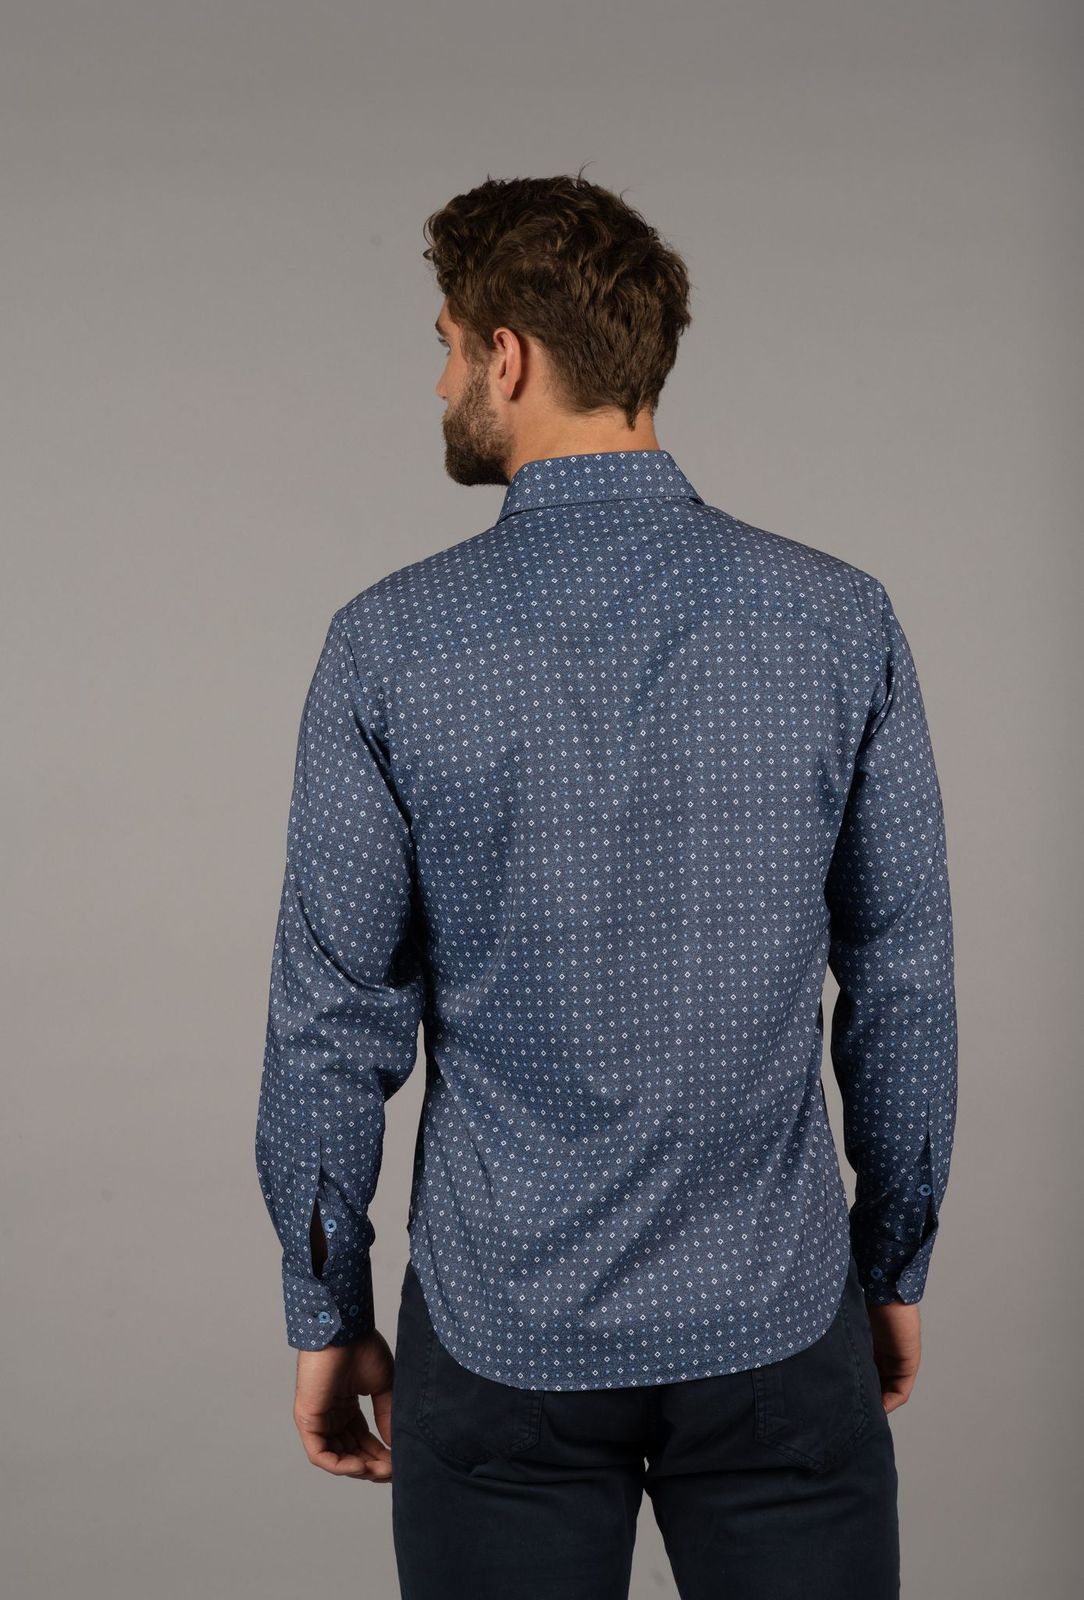 Midnight Blue with White and Light Blue Check Shirt